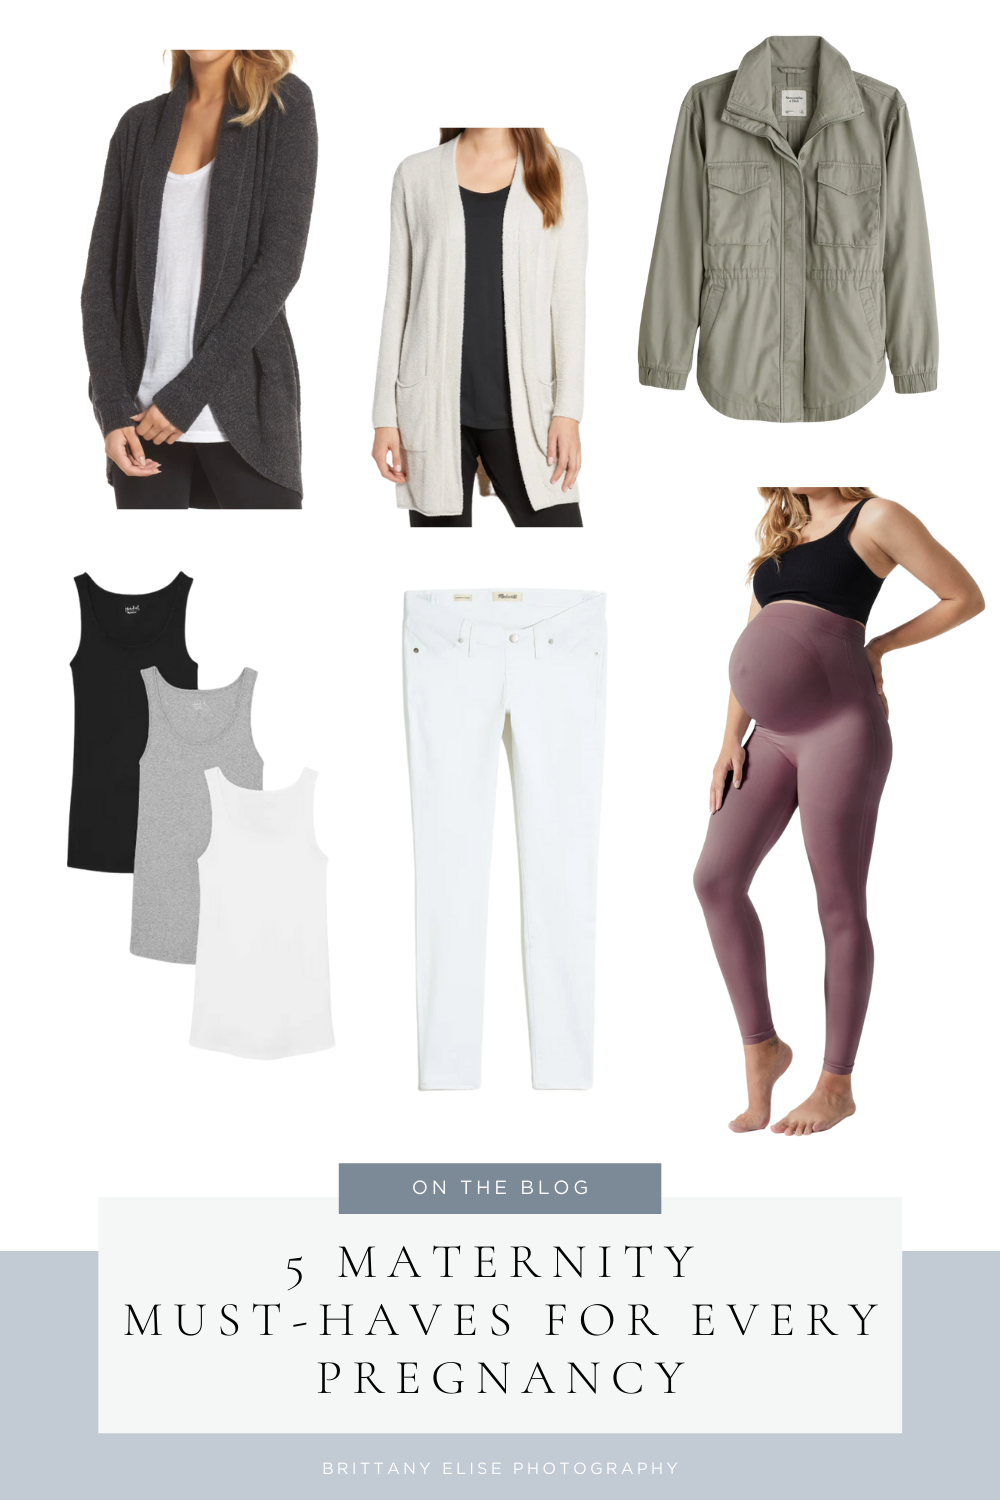 https://brittanyelise.com/wp-content/uploads/2021/07/5-maternity-must-haves-for-every-pregnancy-brittany-elise-1.png